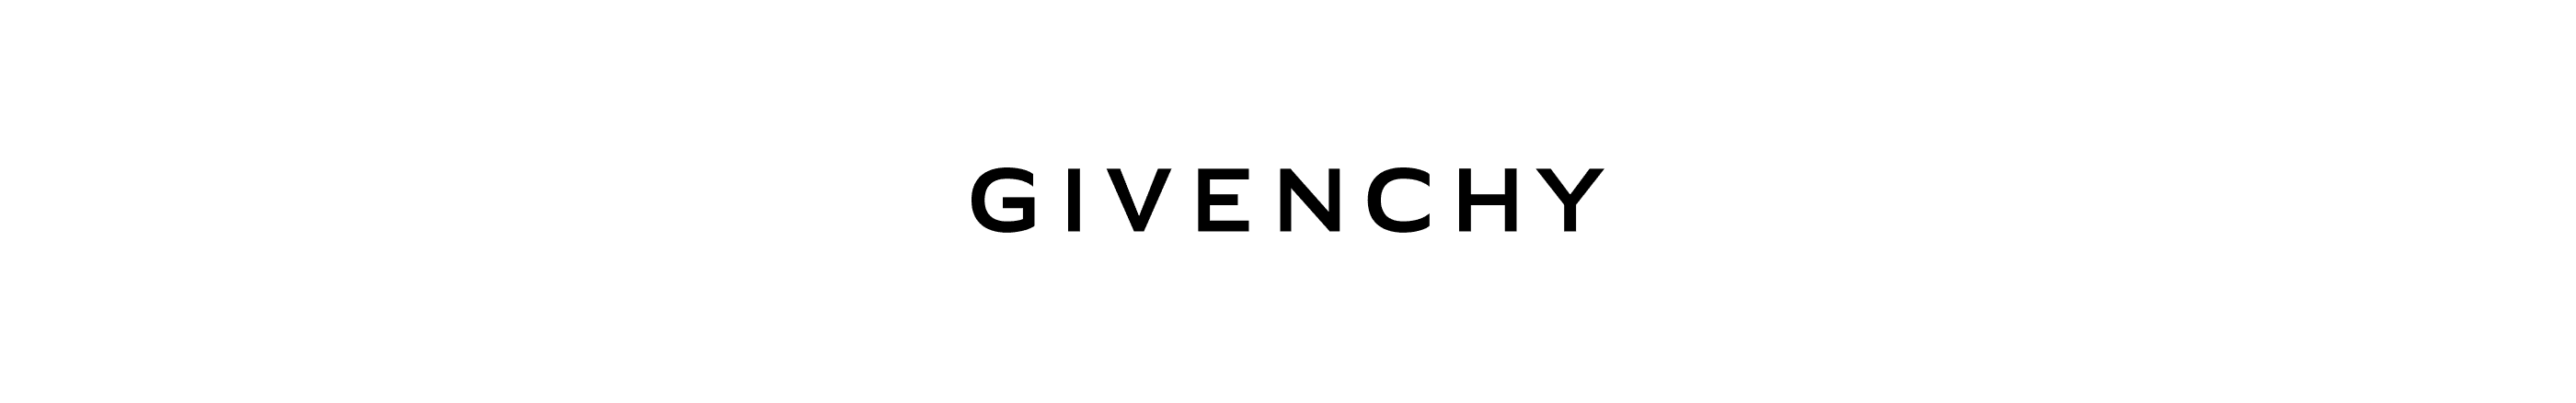 givenchyofficial 横幅